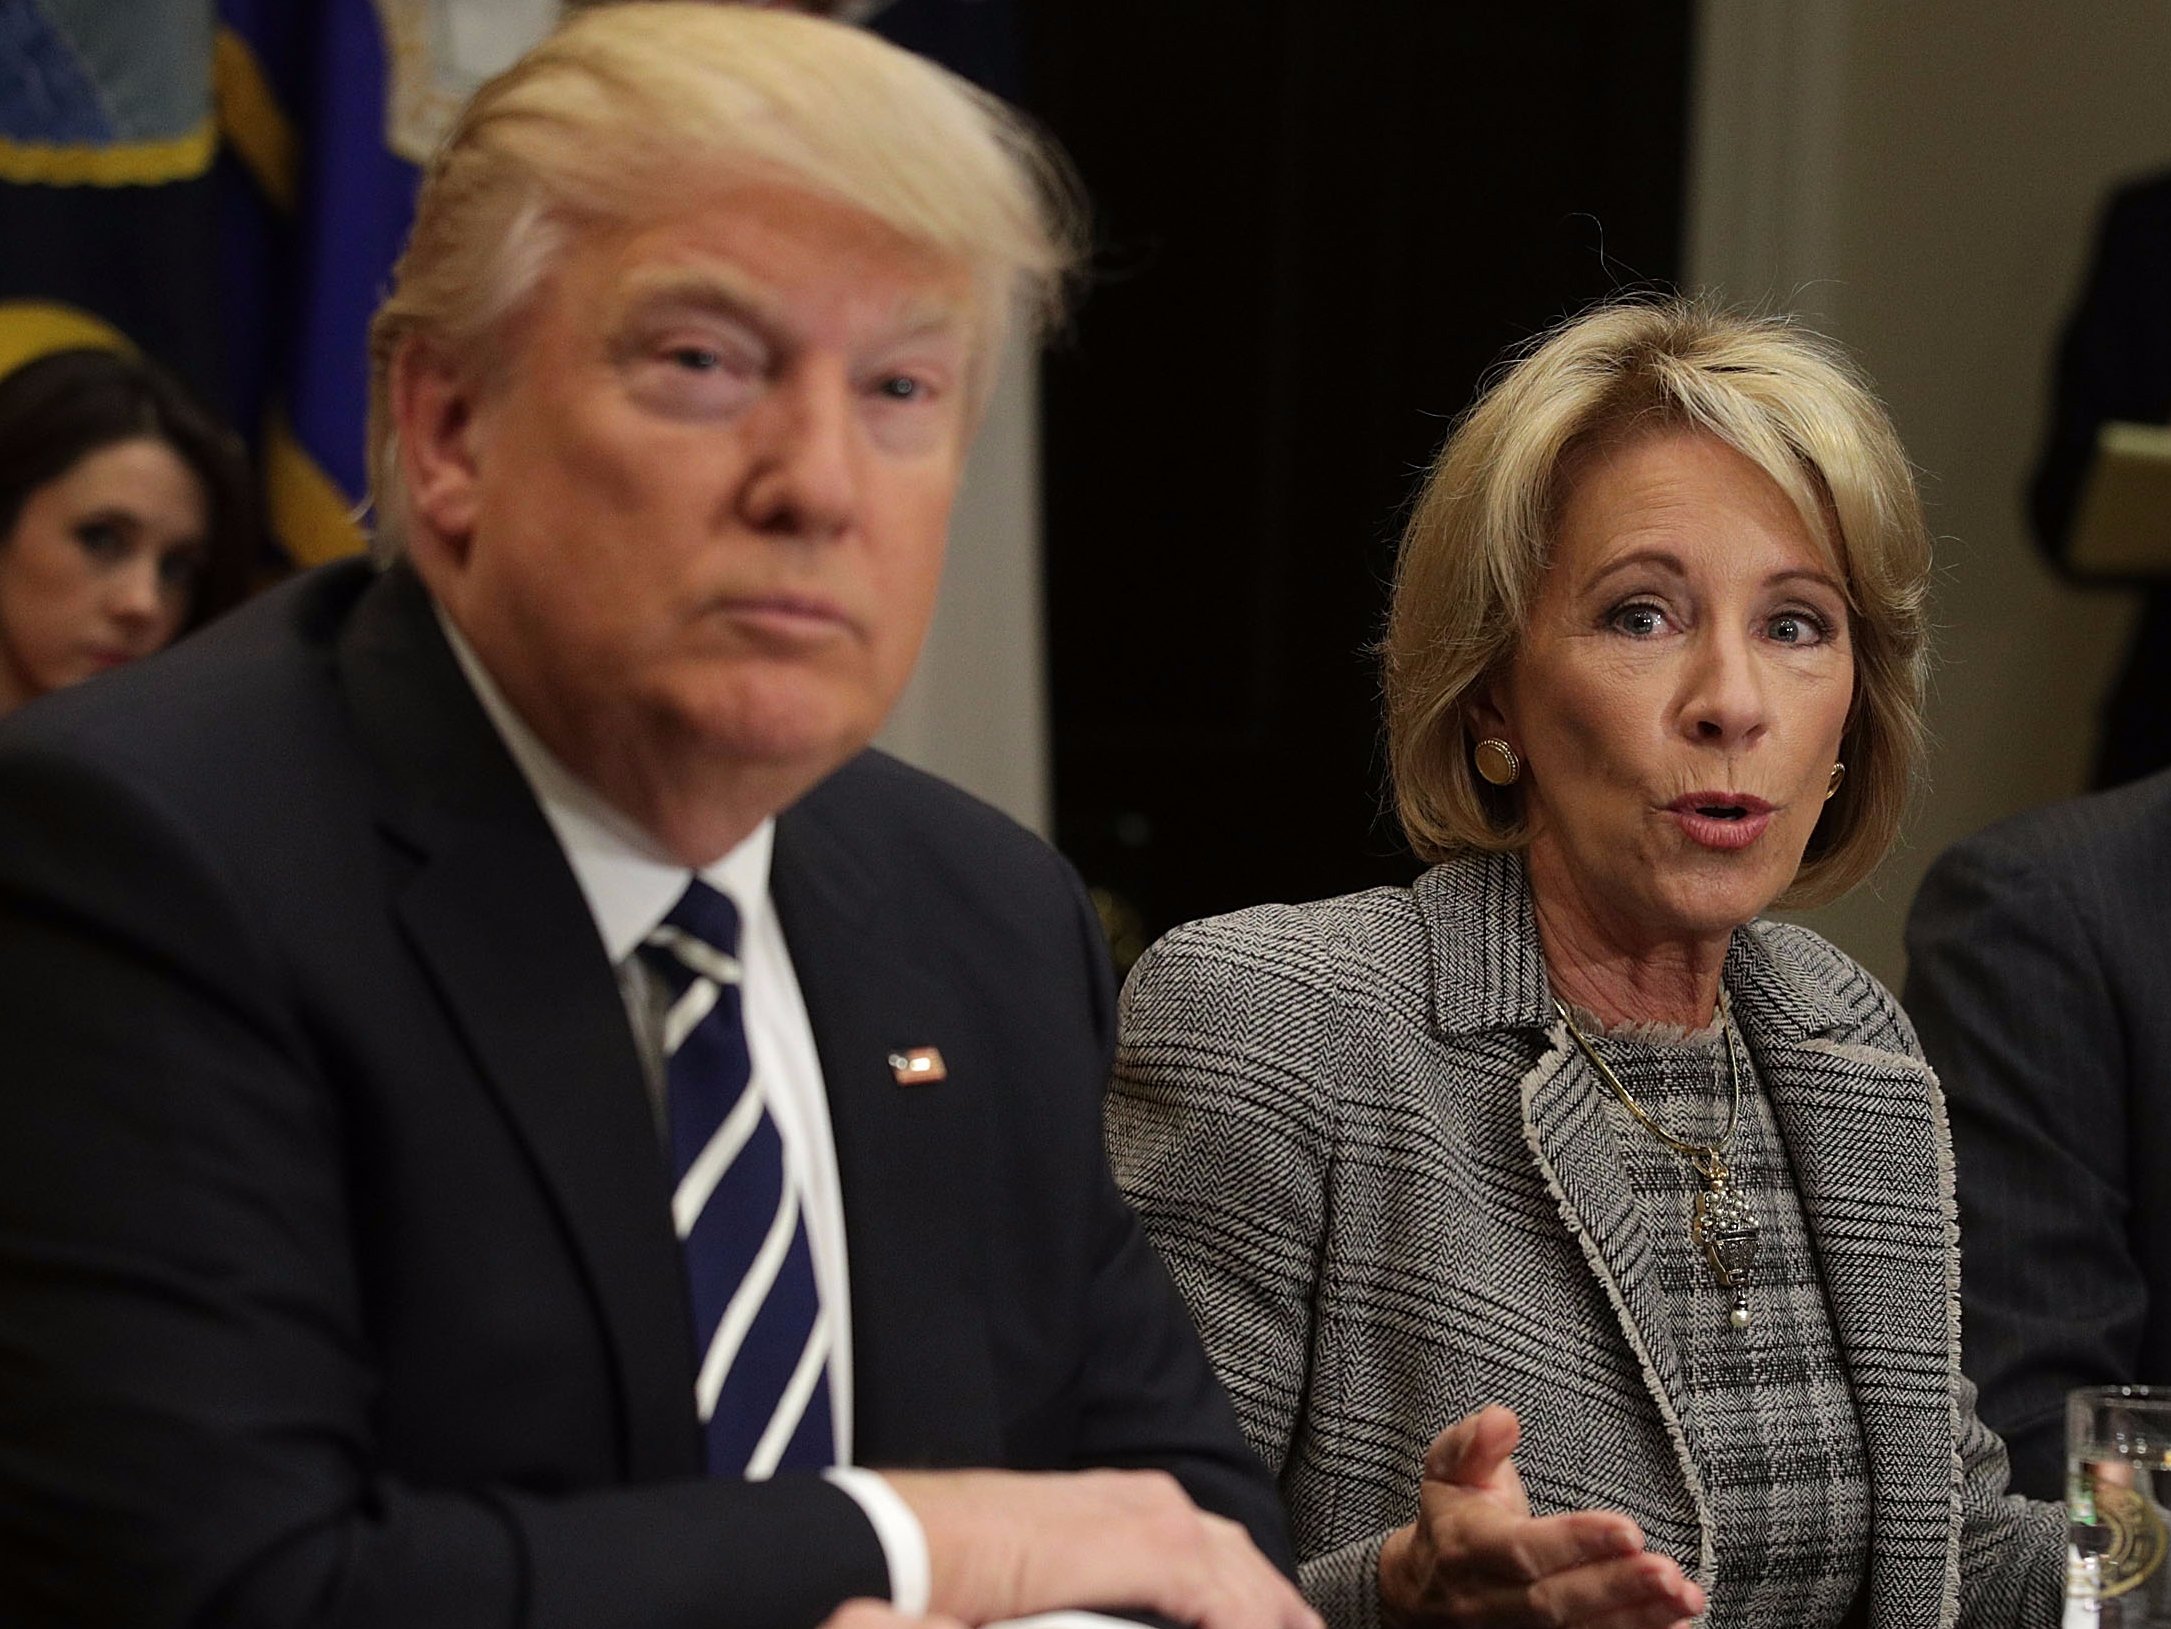 WASHINGTON, DC - FEBRUARY 14: U.S. Secretary of Education Betsy DeVos (C) speaks as President Donald Trump (L) and educator Kenneth Smith (R) listen during a parent-teacher conference listening session at the Roosevelt Room of the White House February 14, 2017 in Washington, DC. The White House held the session to discuss education.